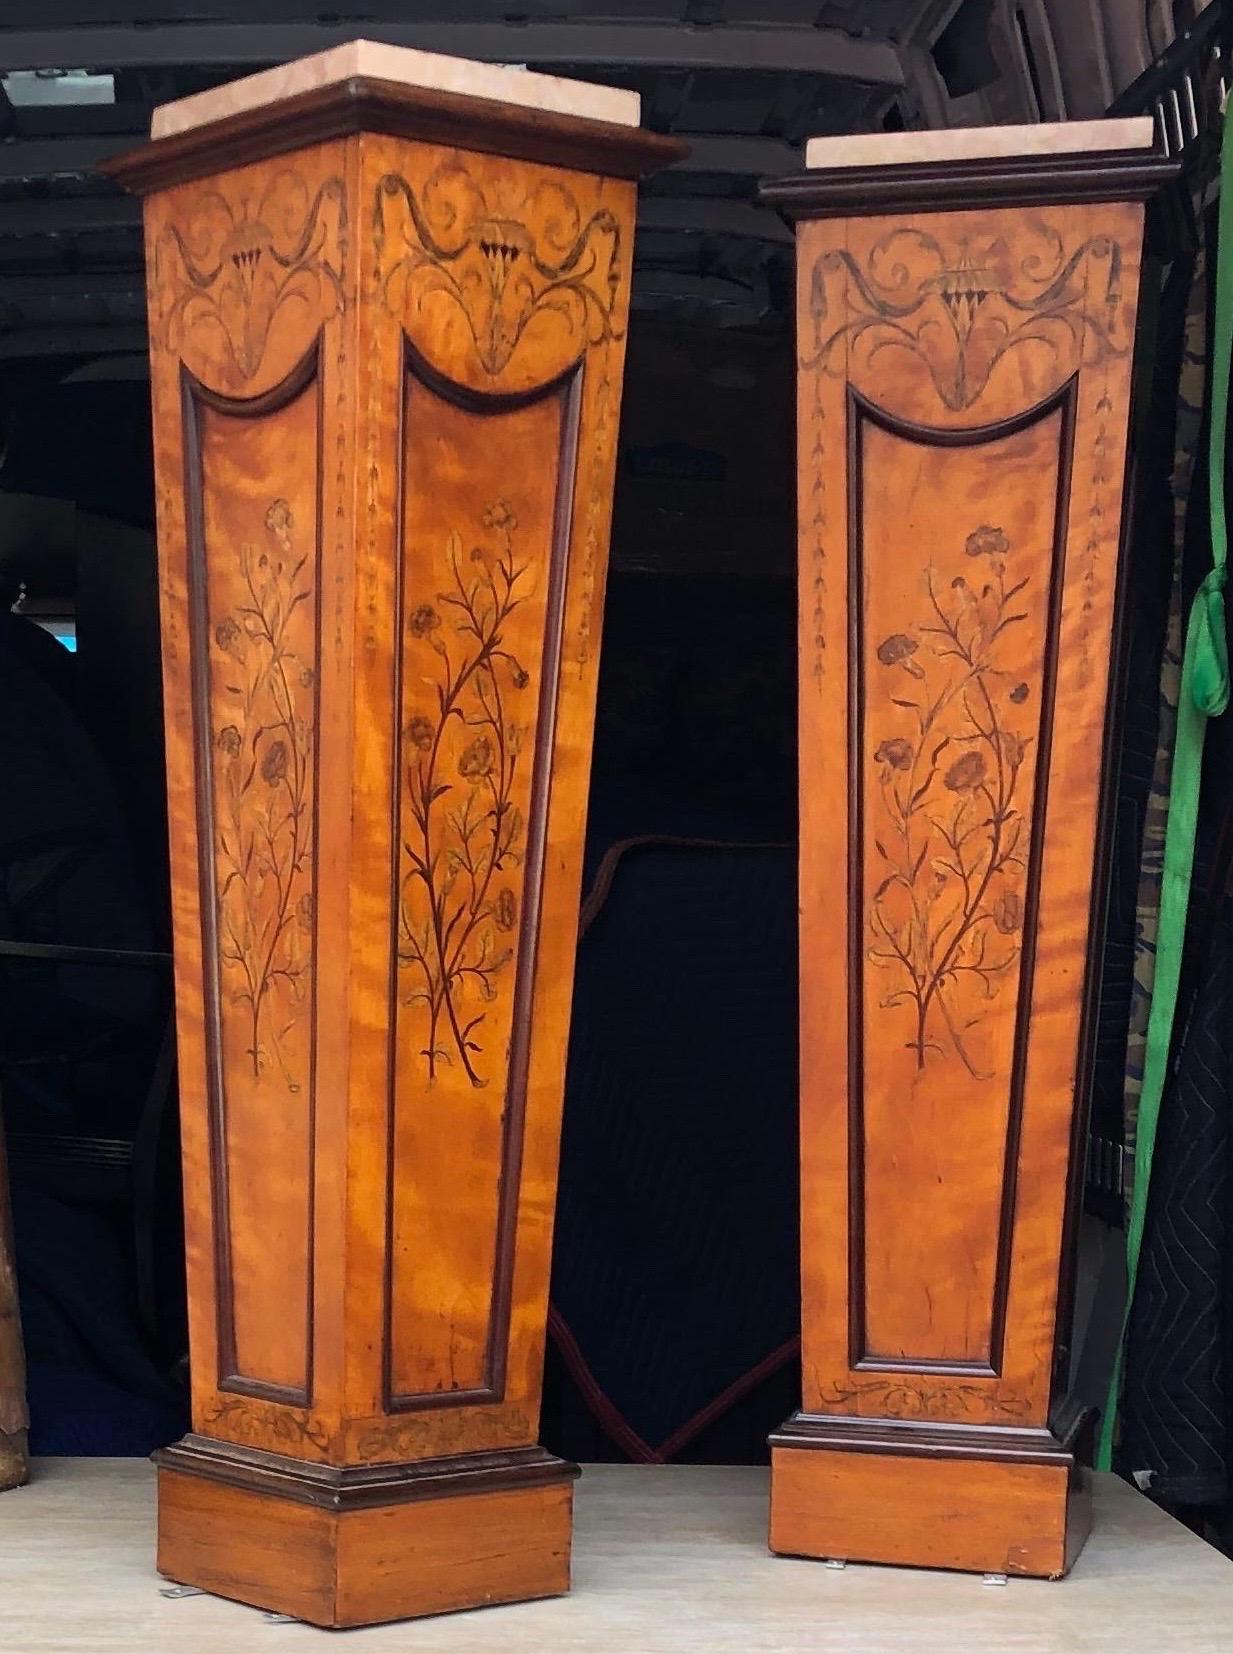 19th century satinwood pedestals with incredible inlay. Possibly Edwards and Roberts. Later marble tops.